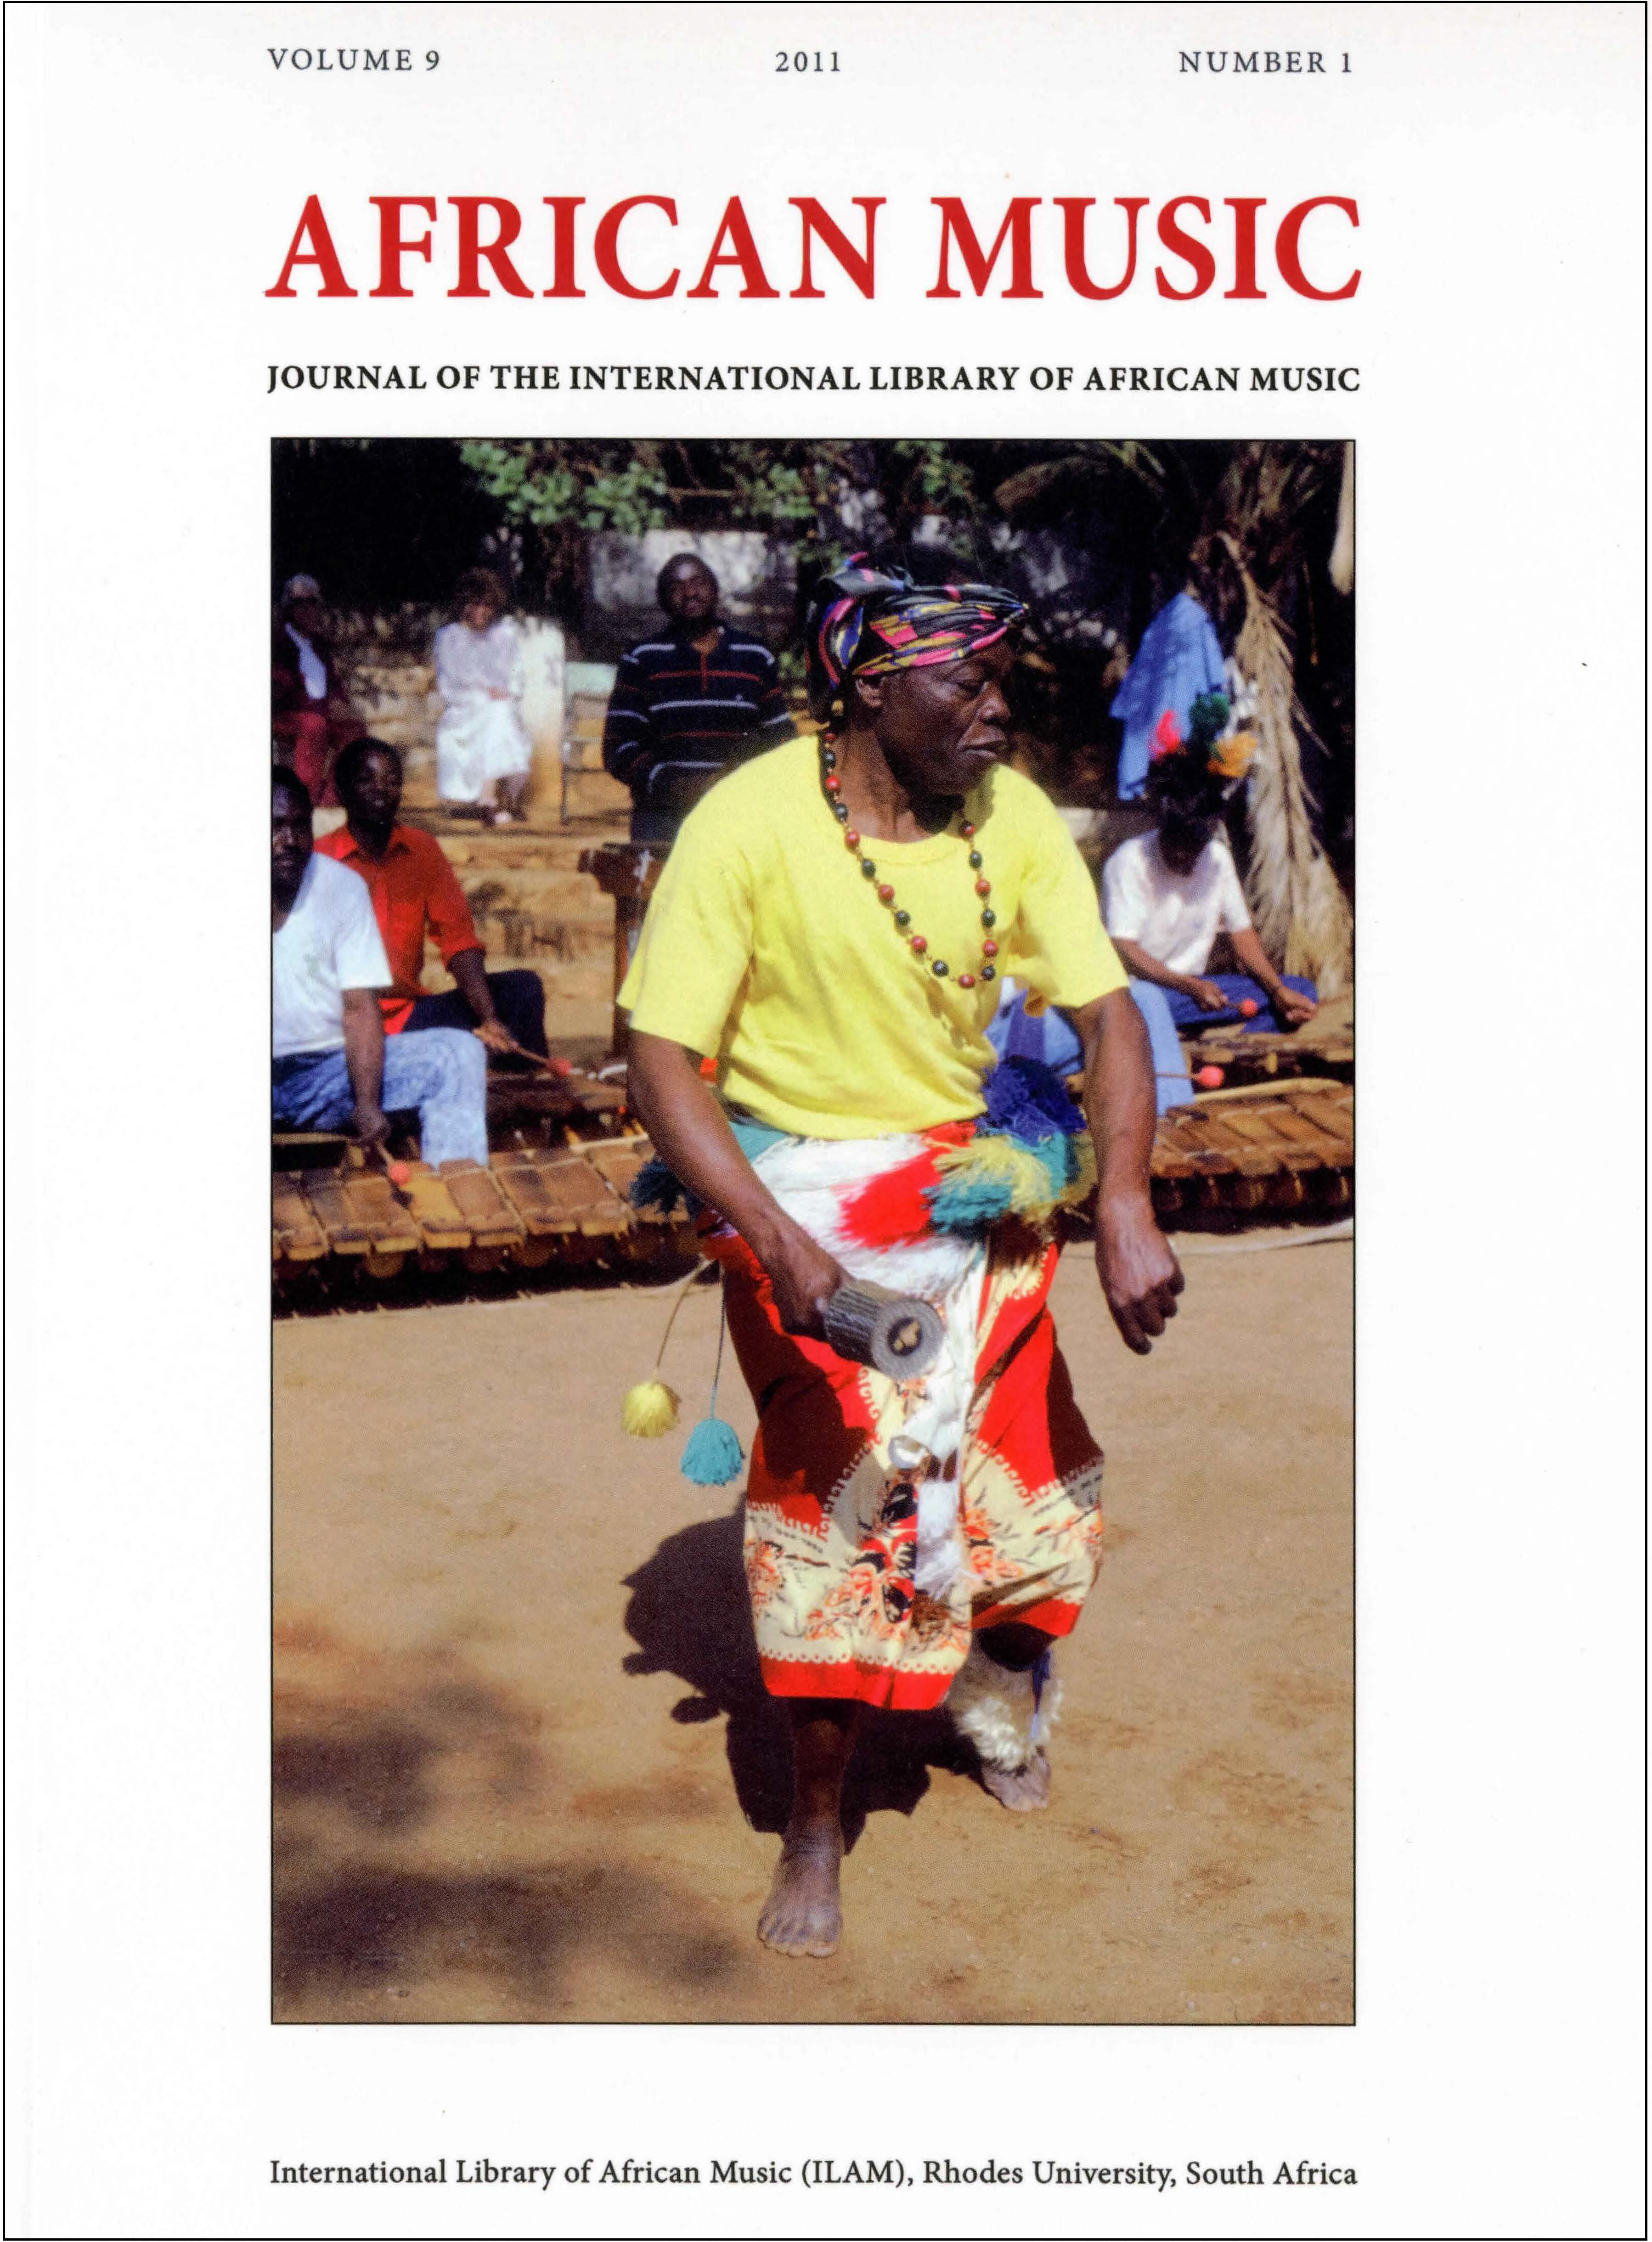 					View Vol. 9 No. 1 (2011): African Music: Journal of the International Library of African Music
				